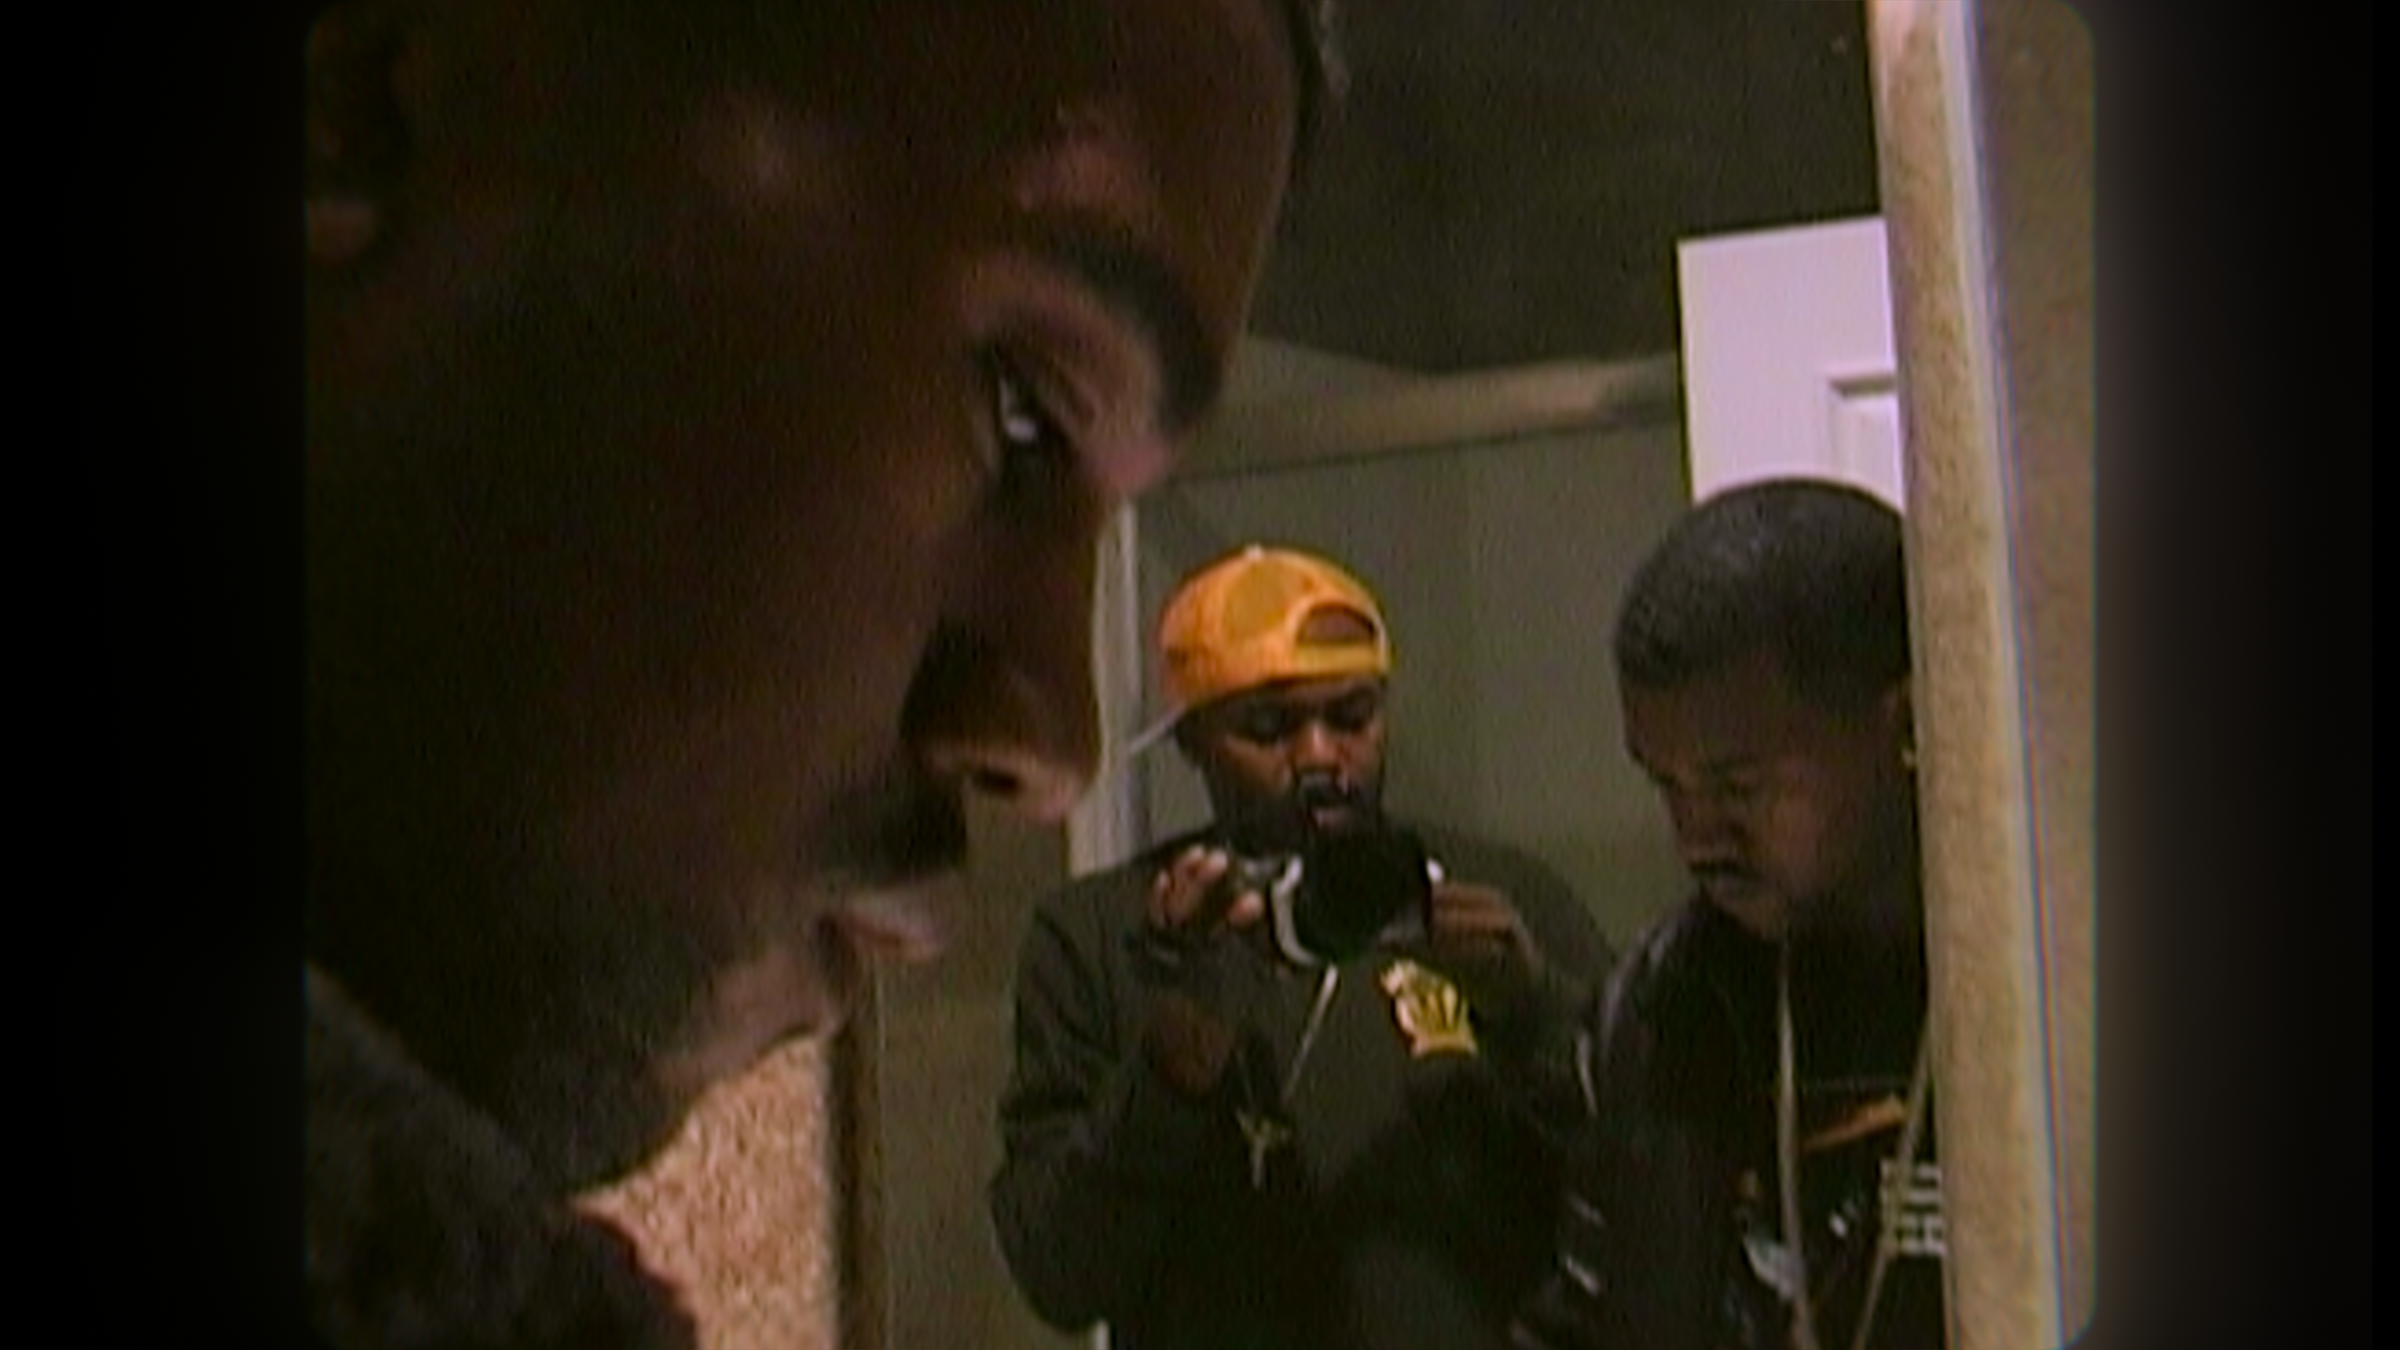 In the background, a mirror shows the reflection of Ye and a man filming him with a camera; Ye&#x27;s downturned profile is seen in the foreground